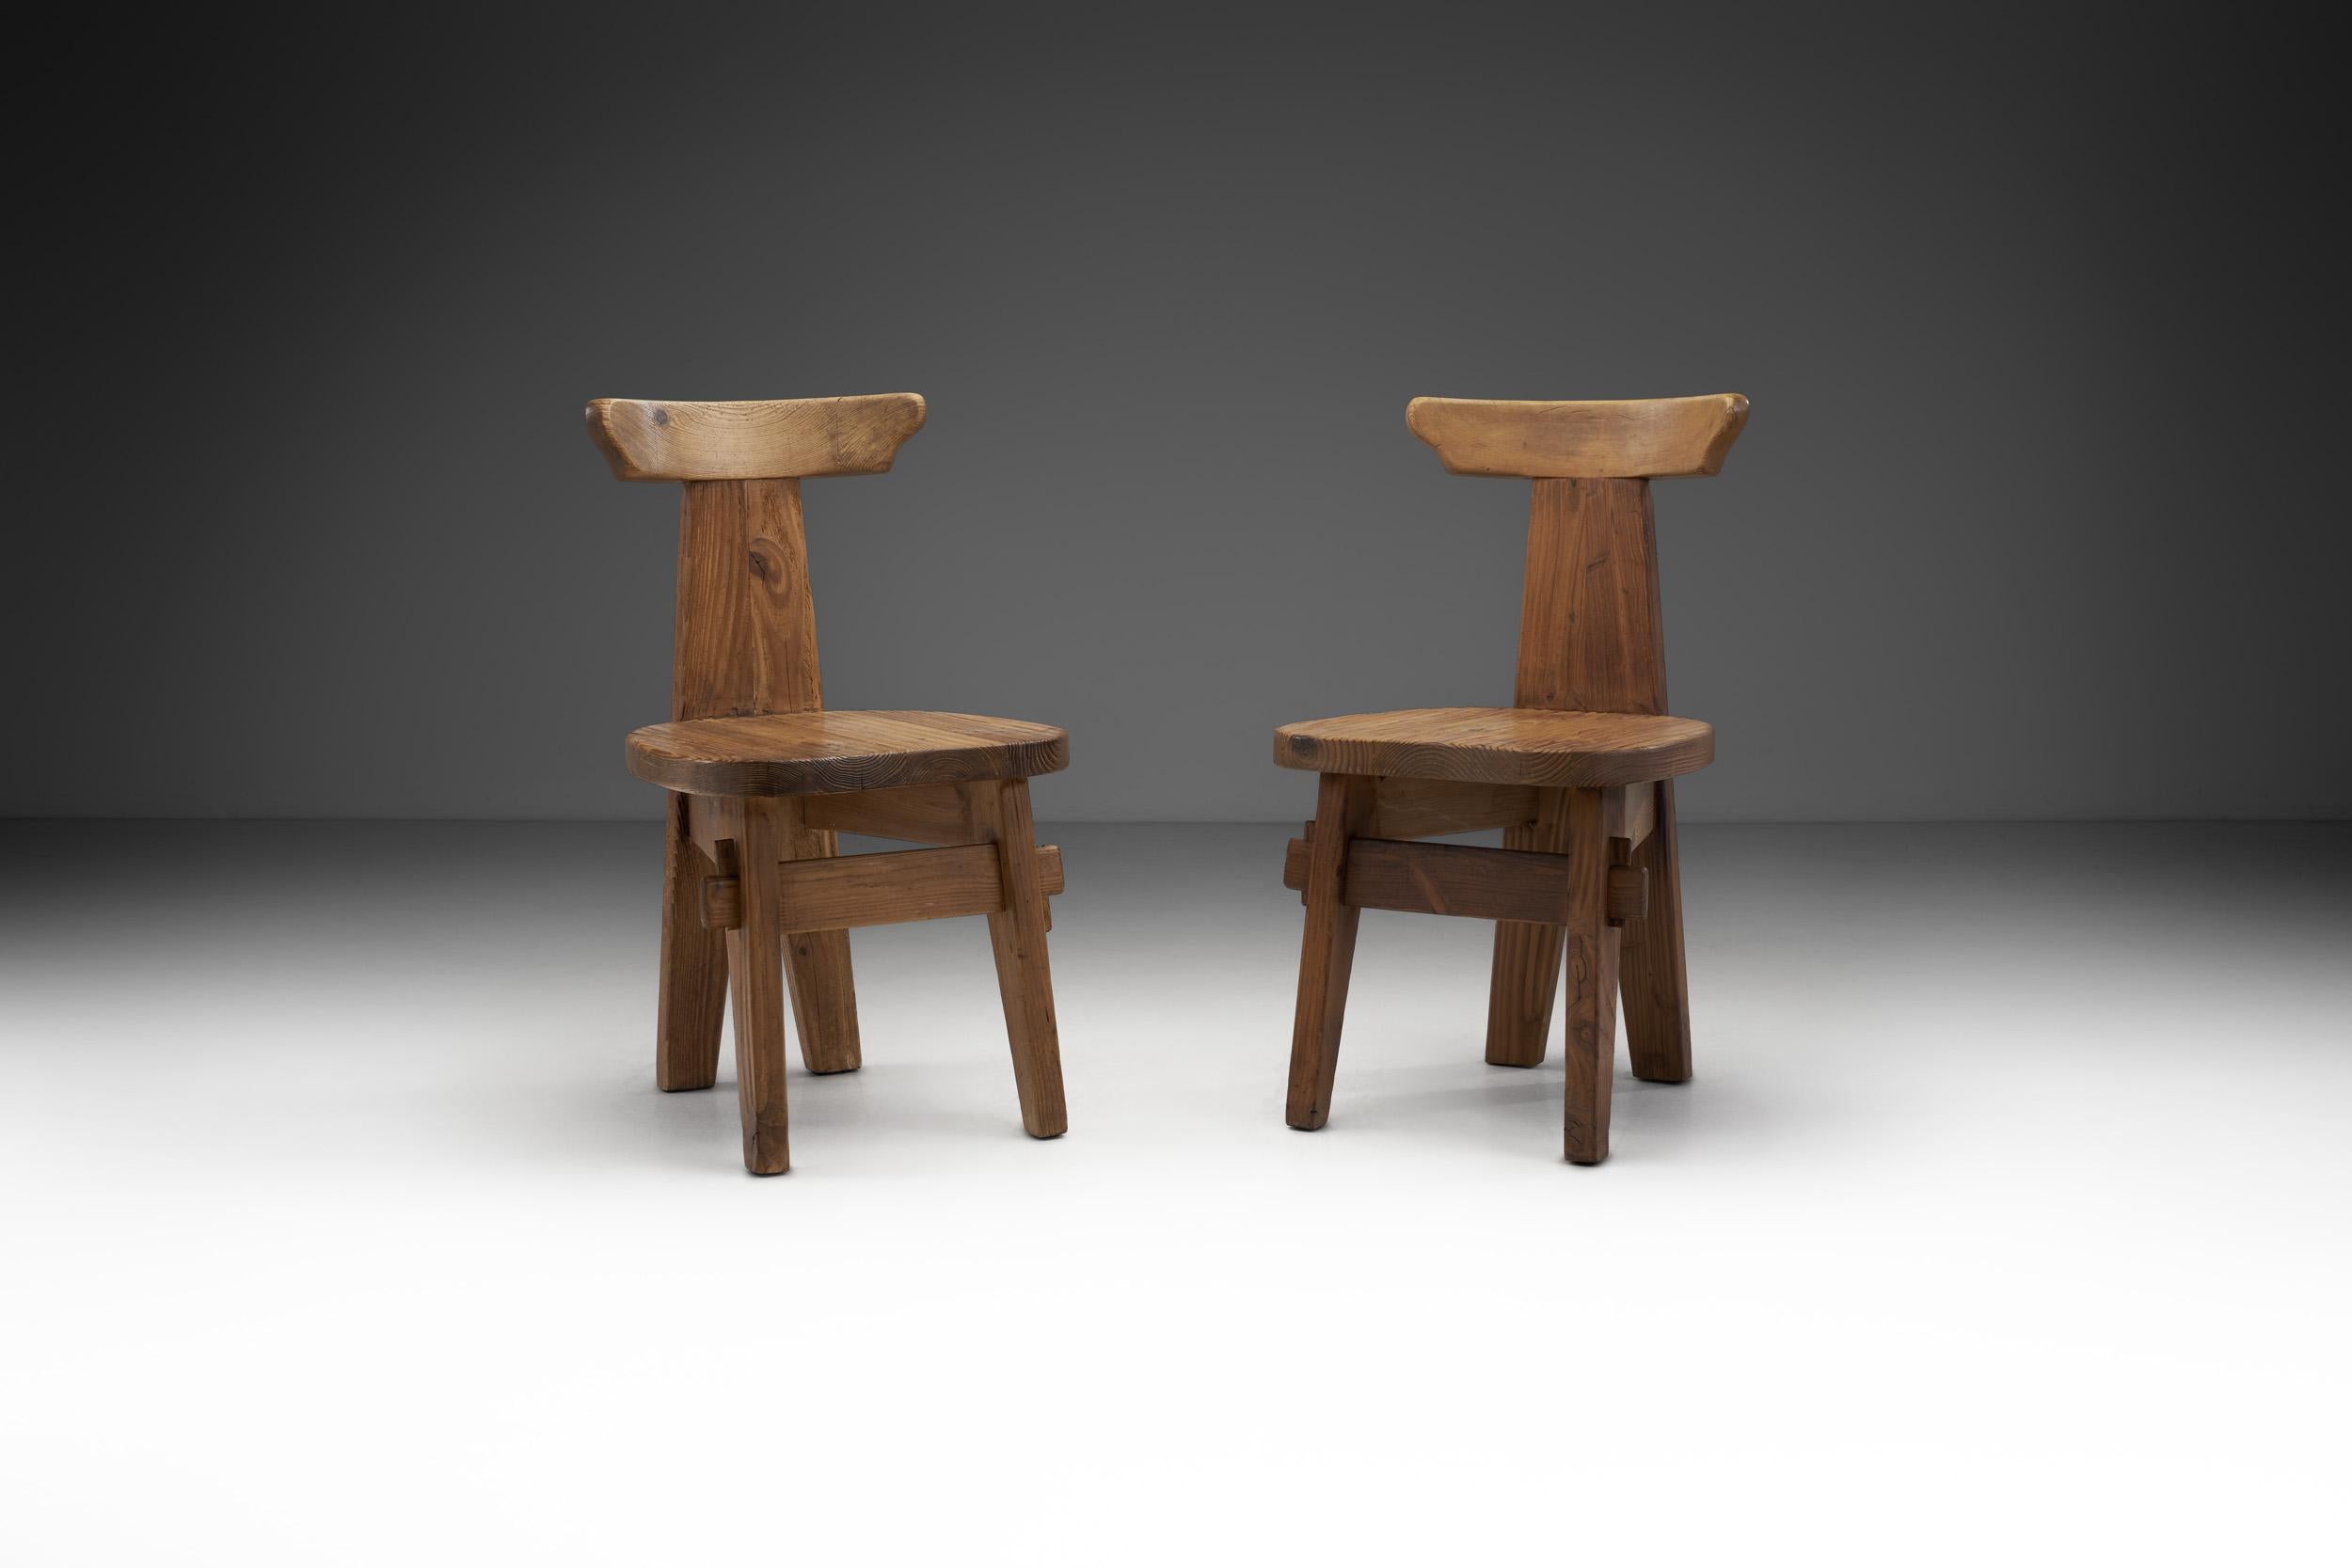 European Solid Wood Brutalist Chairs with Mortise and Tenon Joinery, Europe, circa 1960s